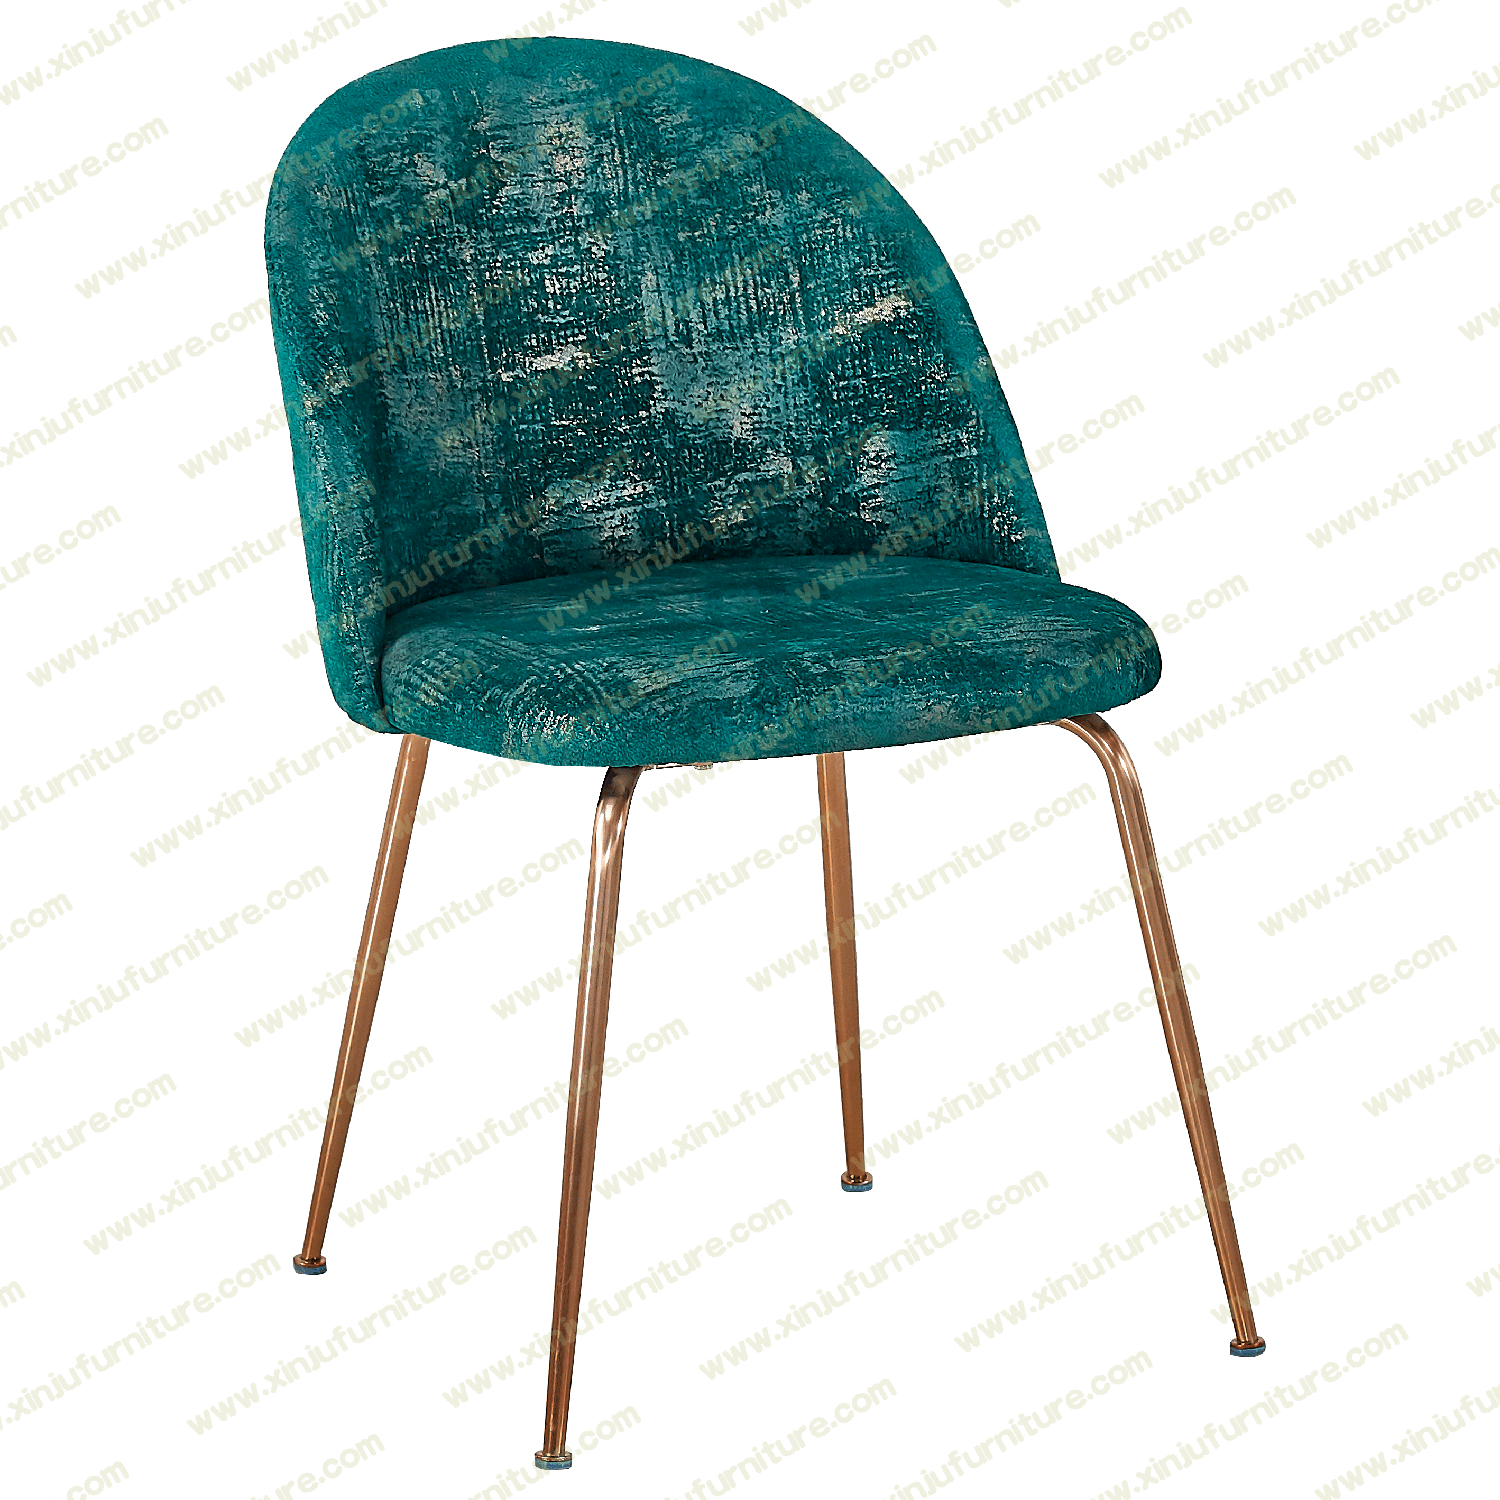 Retro style patched Dining Chair Blue